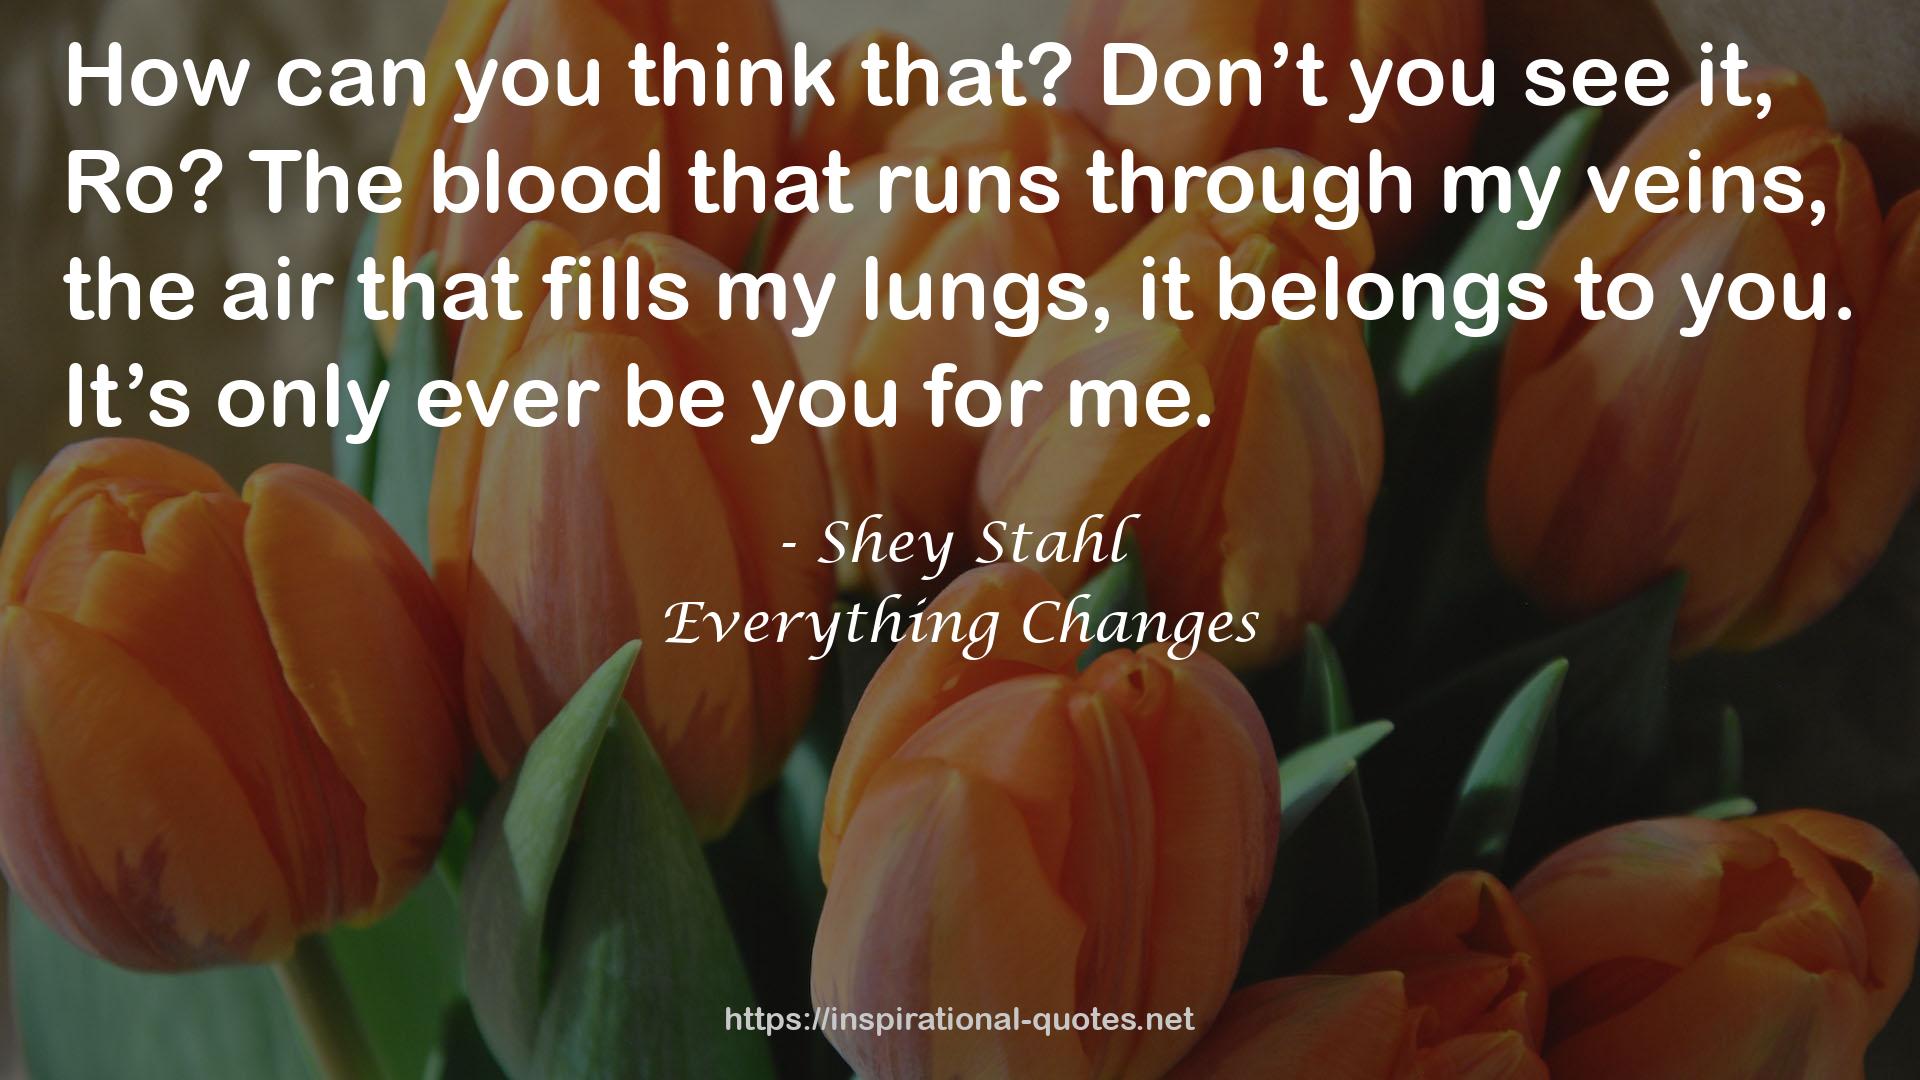 Shey Stahl QUOTES